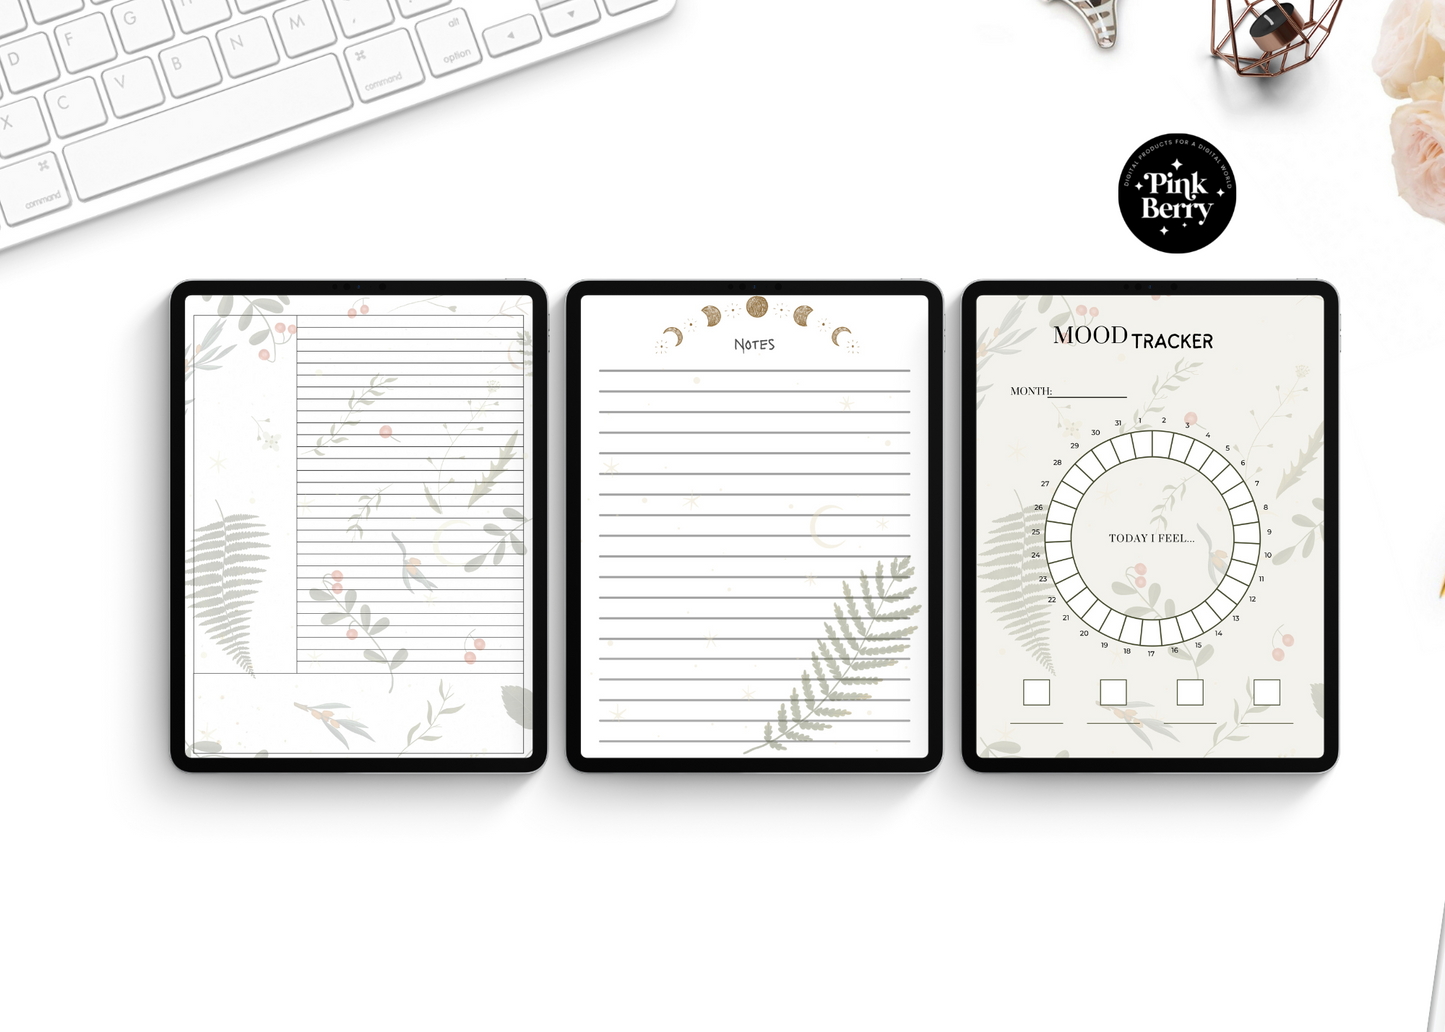 Digital Secrets Journal - 12 Templates | Digital Journal Insets | Digital Diary | Forest Themed Journal- Goodnotes and Notability Inserts- Night Forest Theme